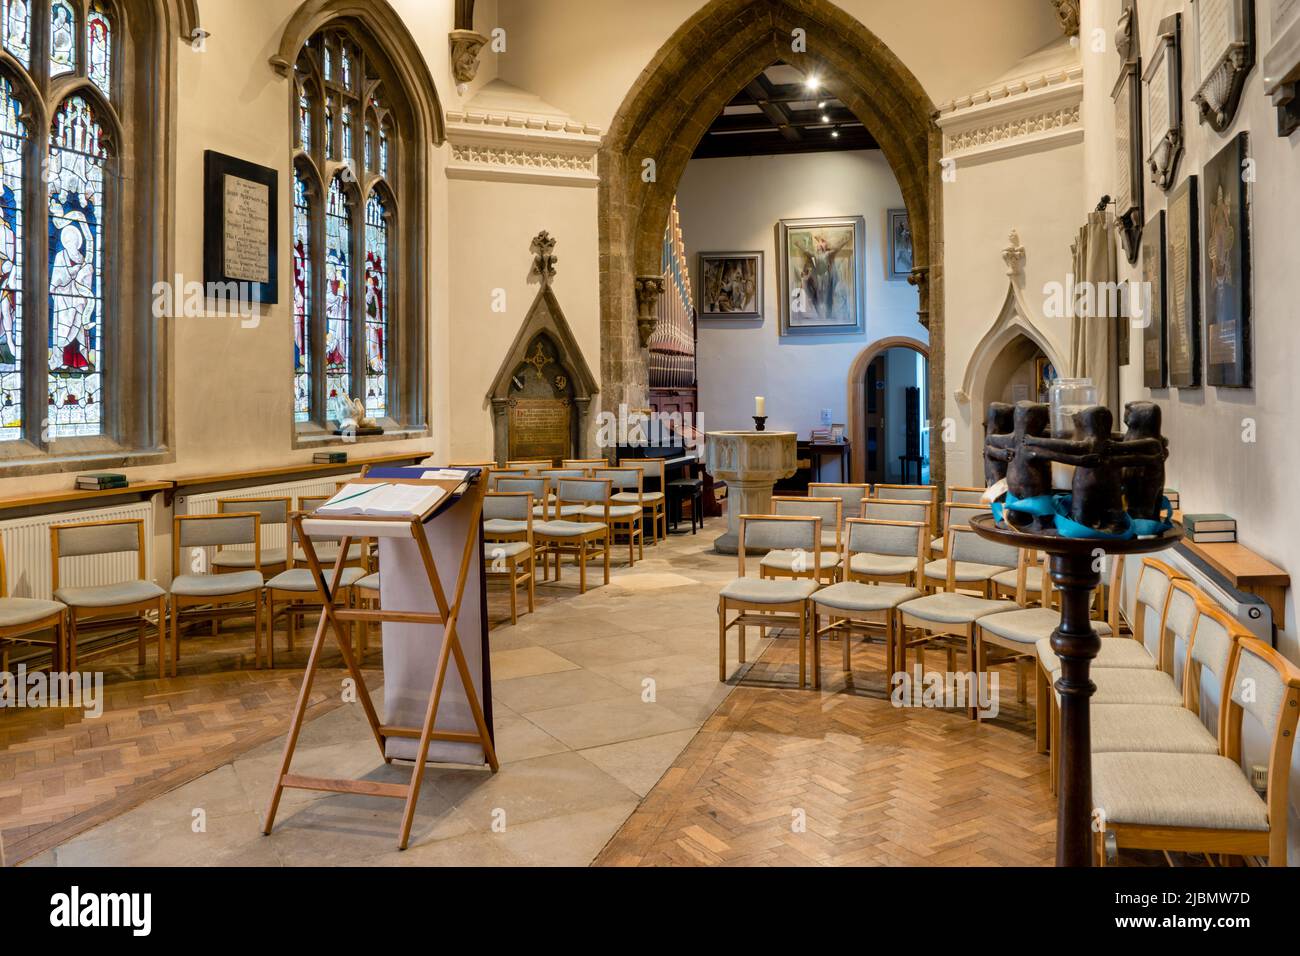 Interior of the Chapel of Saint John the Baptist at Launde Abbey from the front Stock Photo